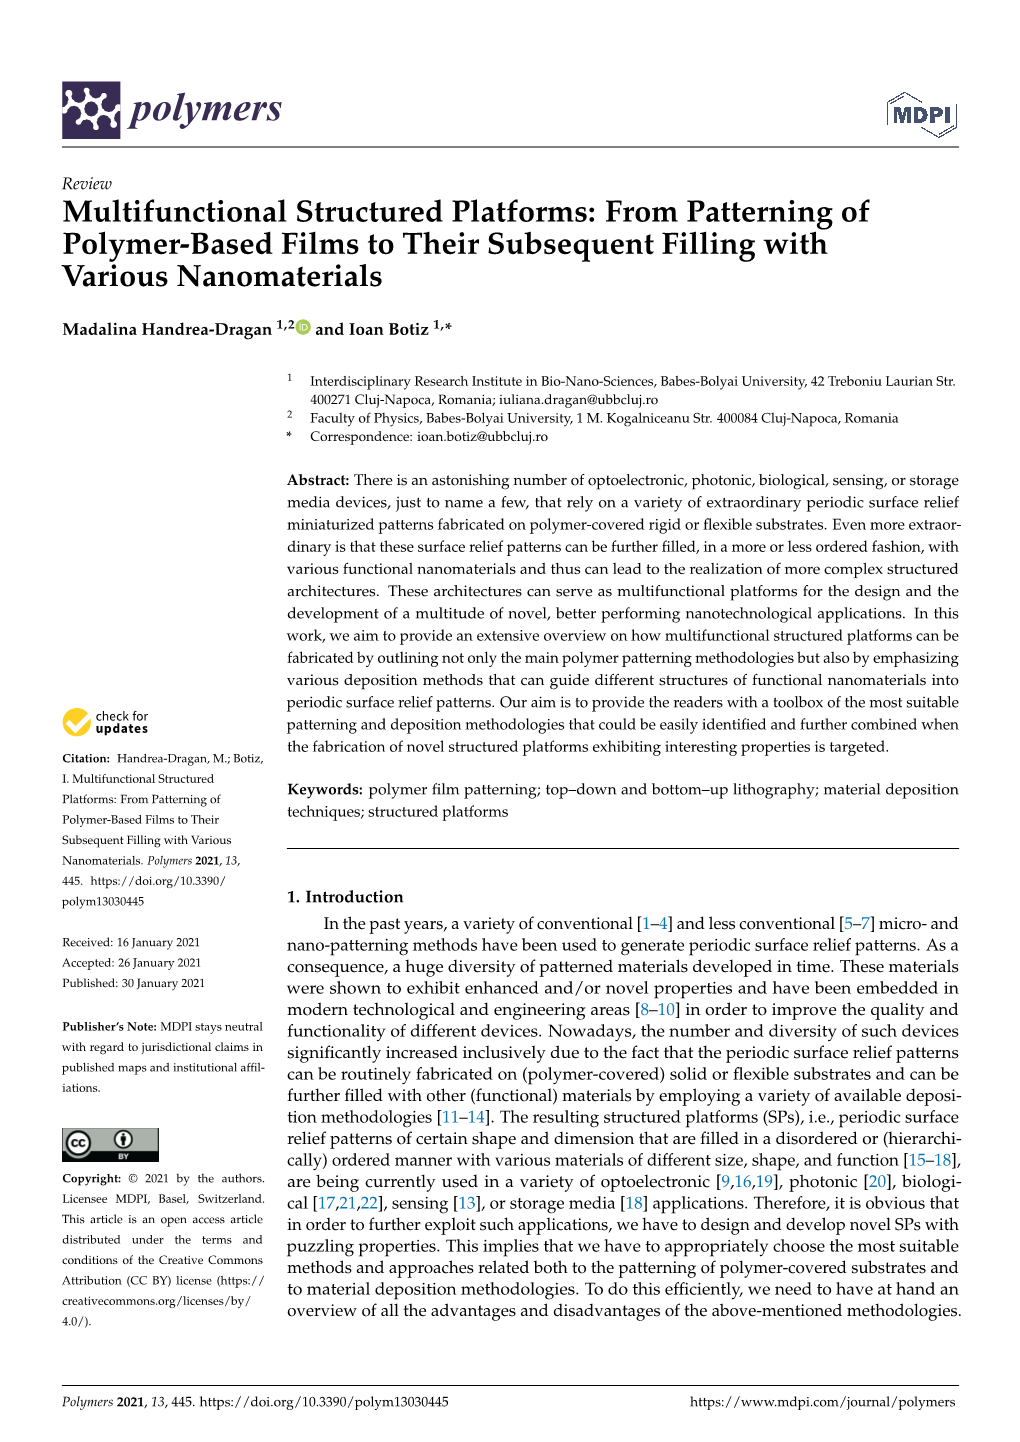 From Patterning of Polymer-Based Films to Their Subsequent Filling with Various Nanomaterials